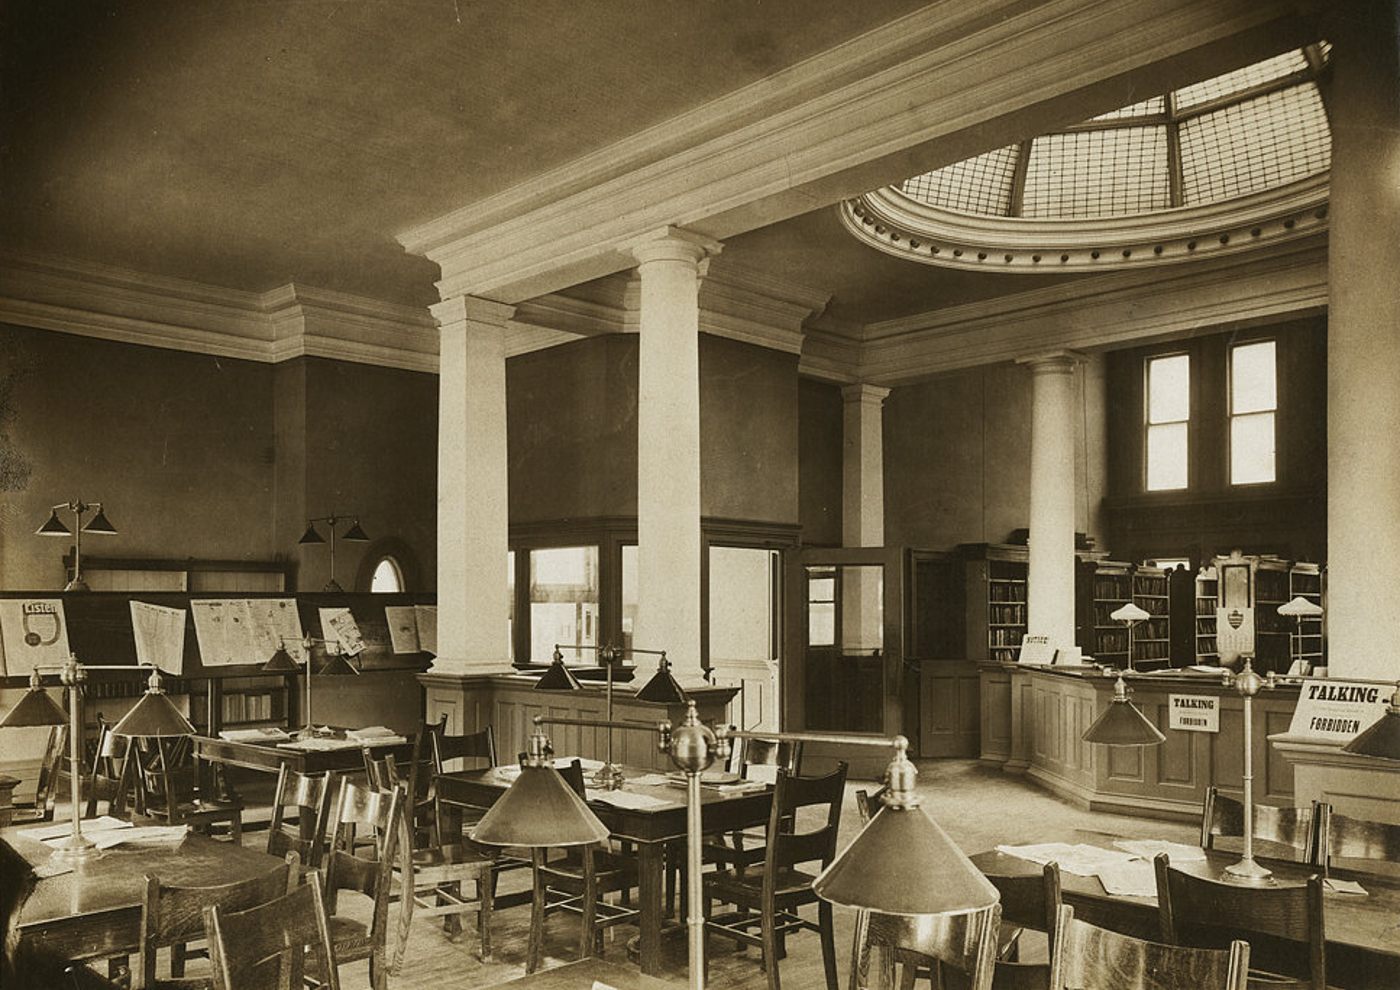 Photograph of the interior of the Paris Library before 1950